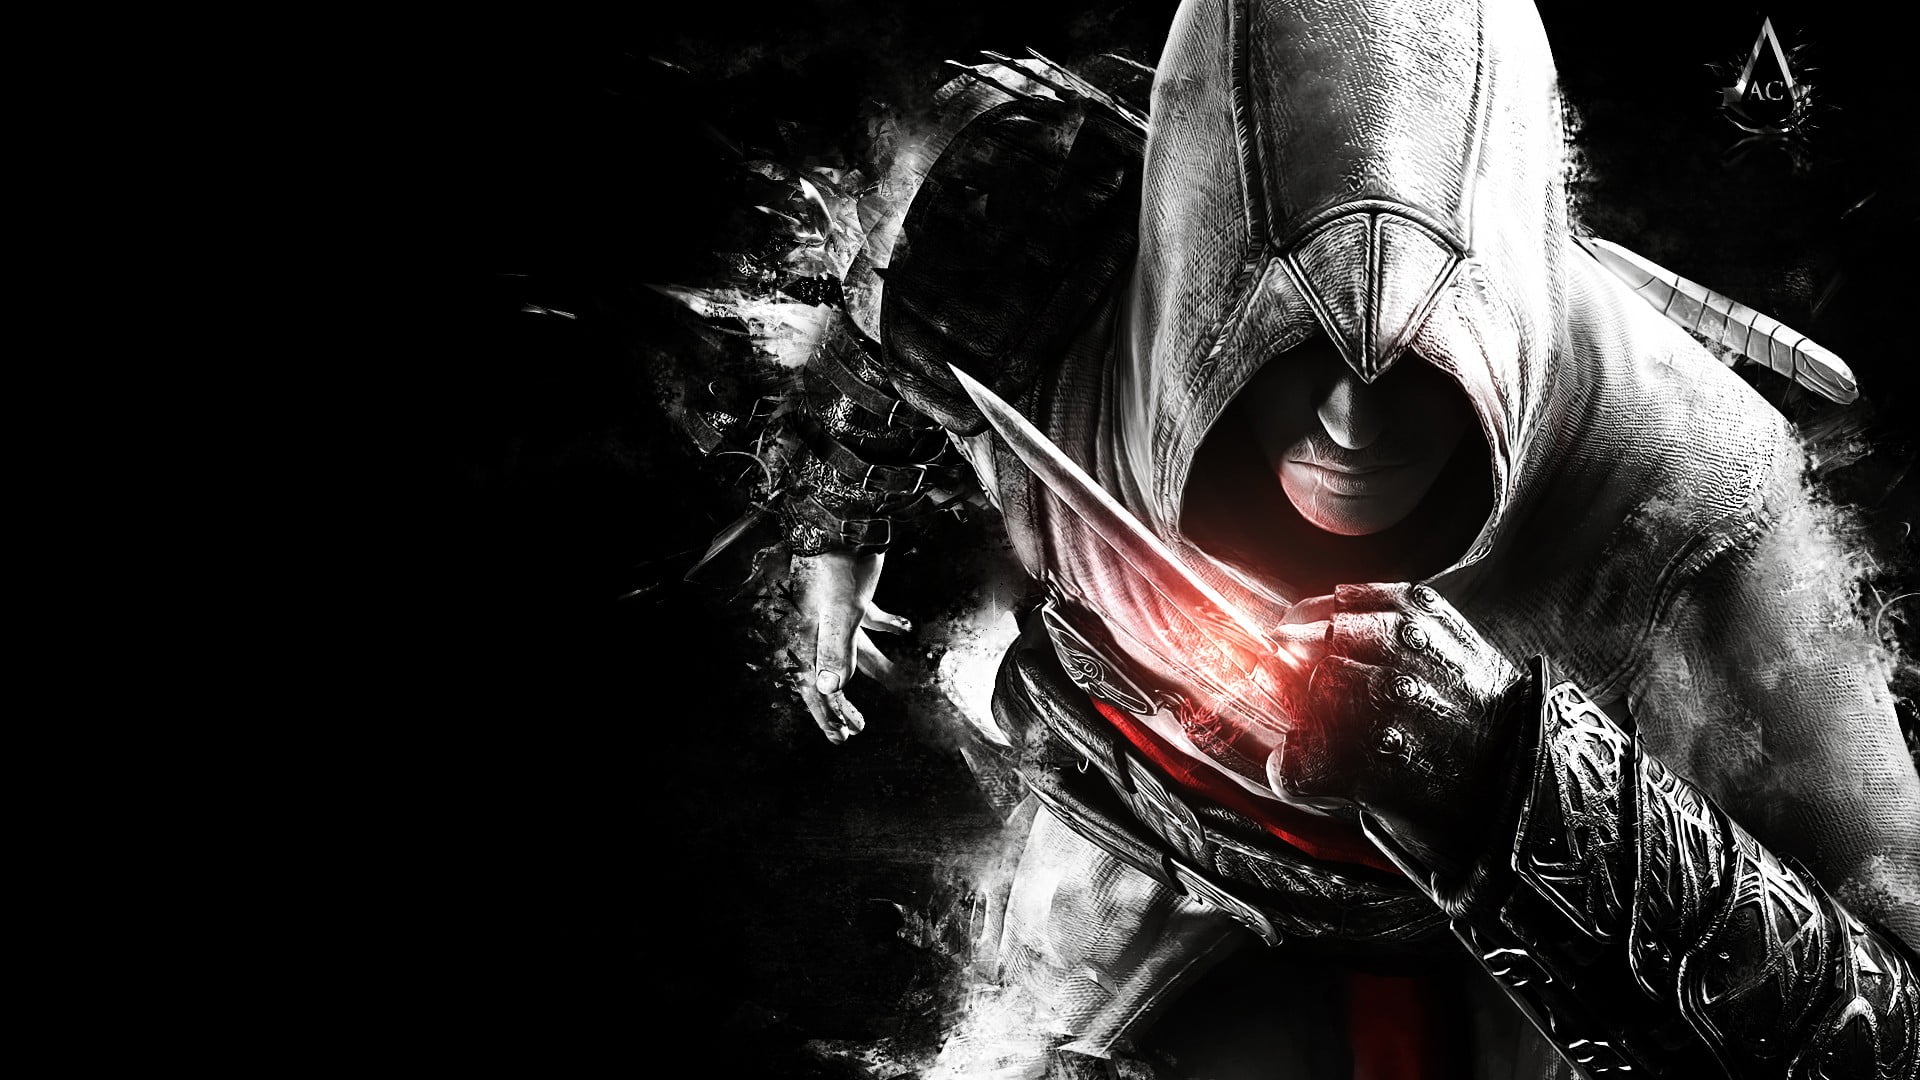 Assassin's Creed wallpaper, indoors, one person, close-up, motion